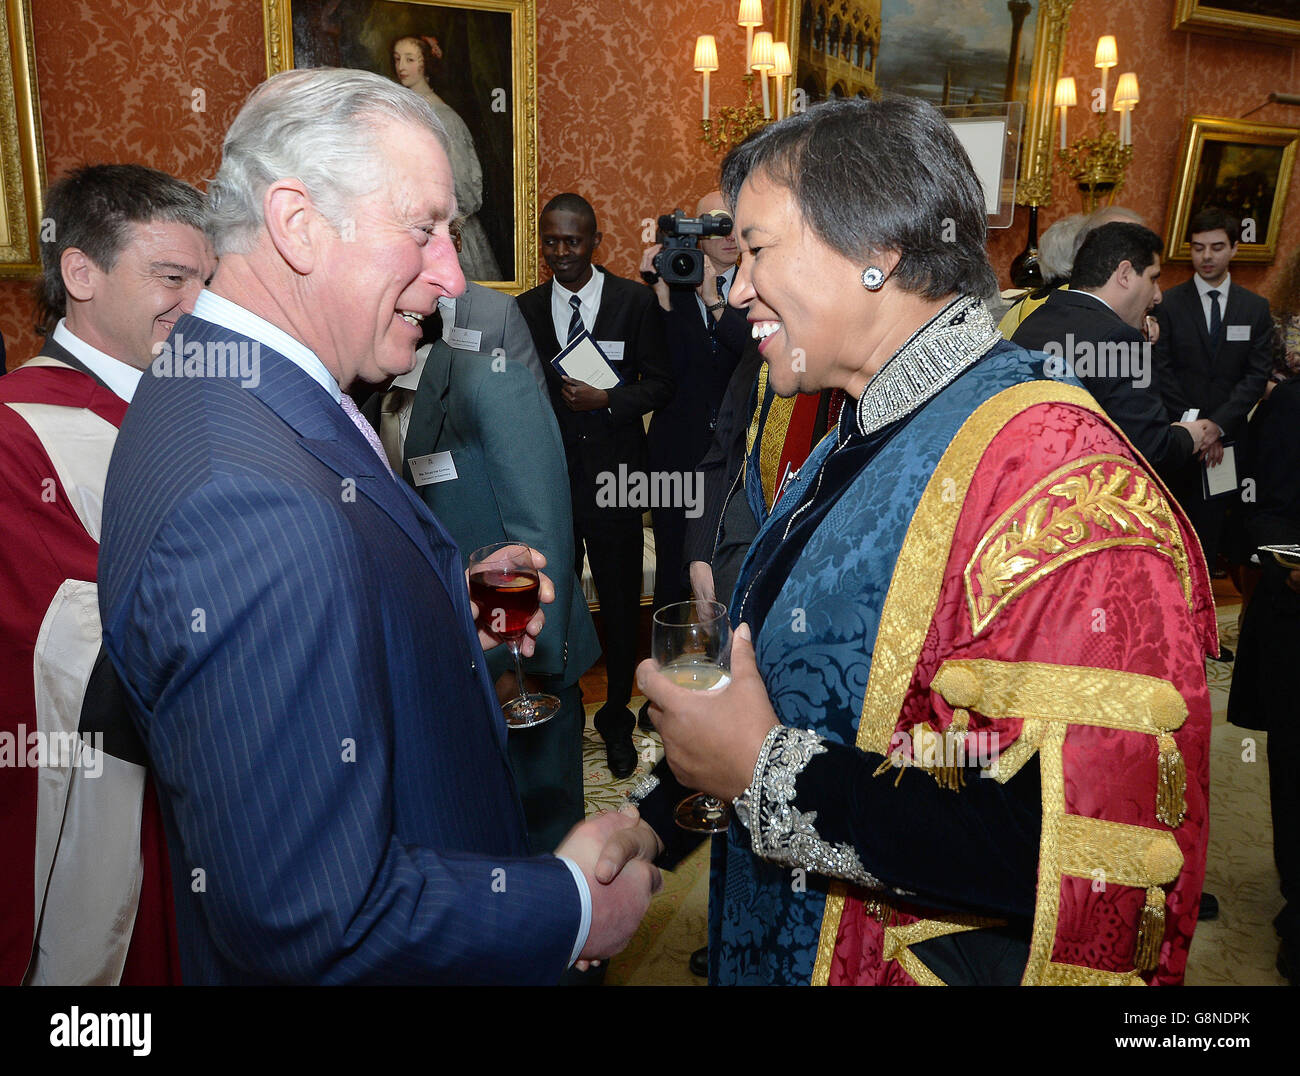 The Prince of Wales with Baroness Scotland at a reception after the presentation of The Queen's Anniversary Prizes for higher and further education in Buckingham Palace, London. Stock Photo